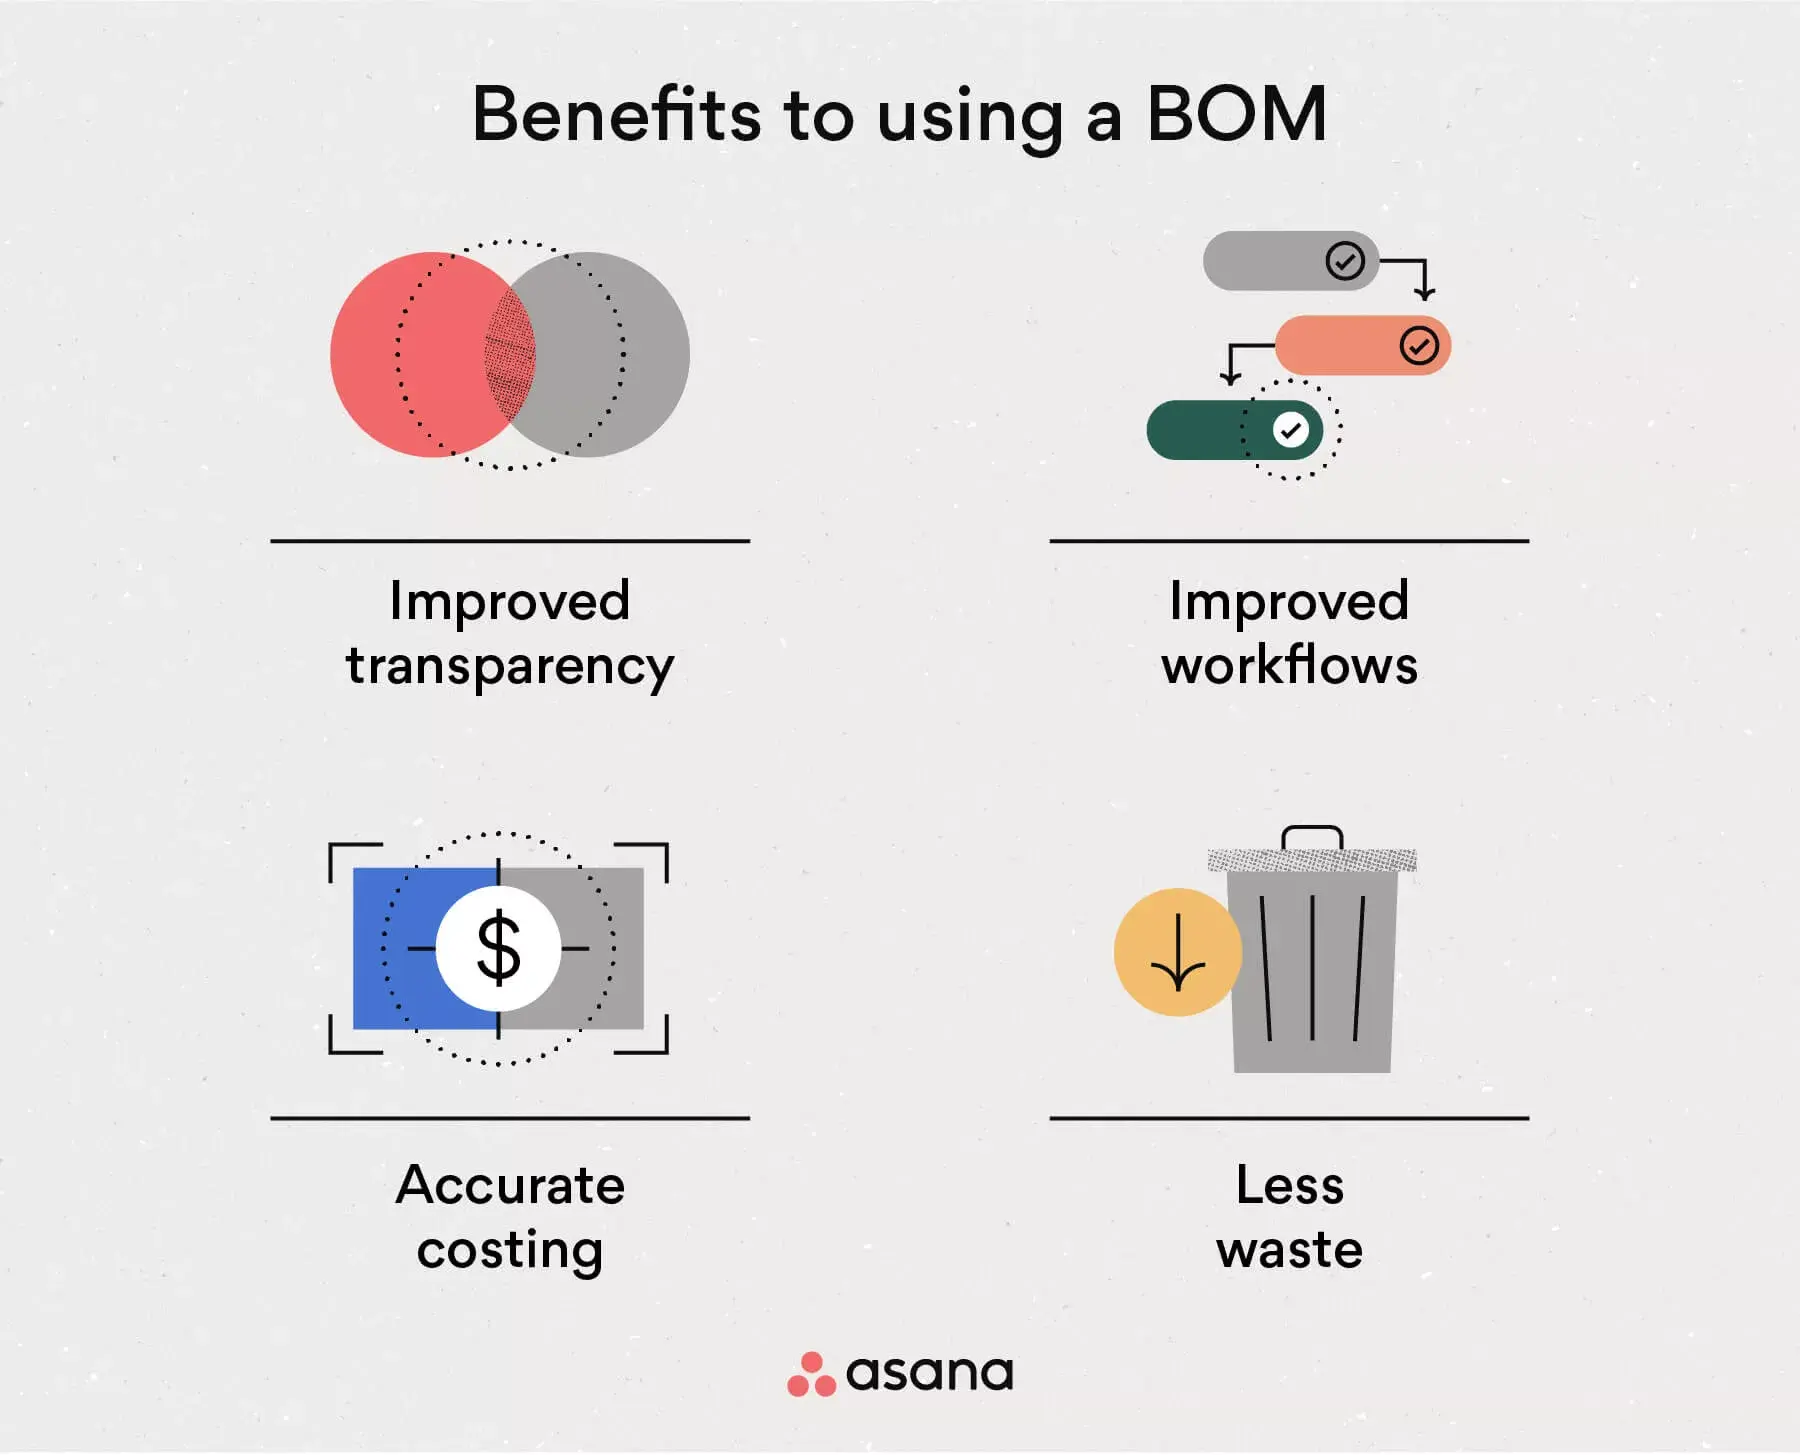 [inline illustration] Benefits of using a BOM (infographic)